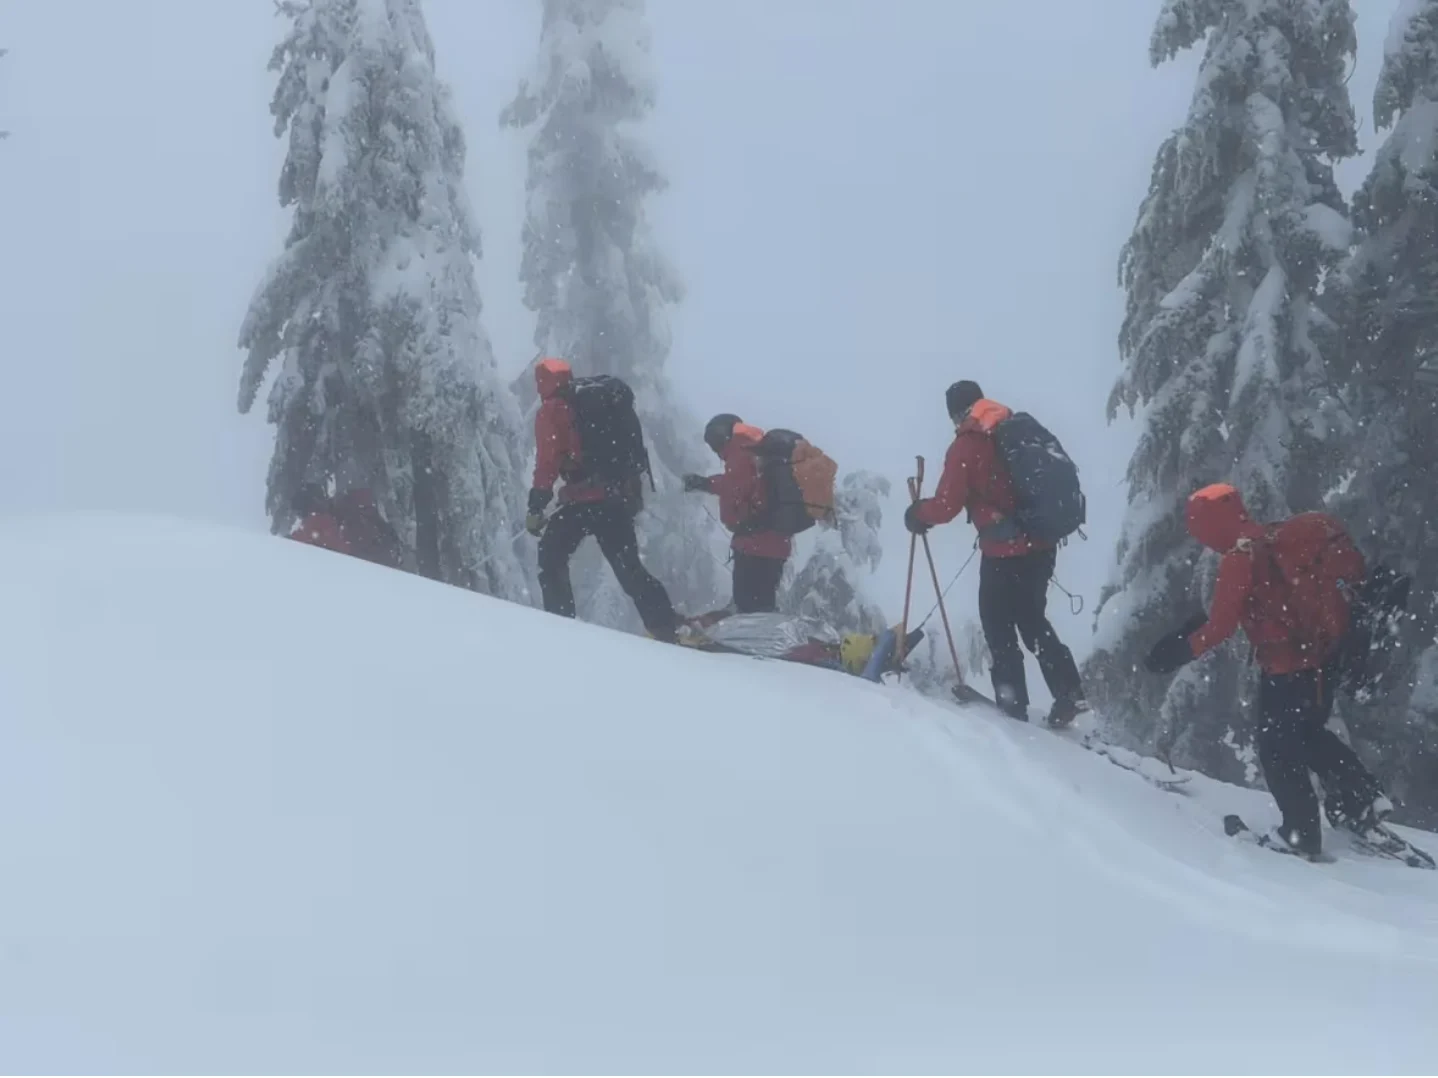 CBC: A North Shore Rescue crew moves the woman to safety. The organization says she was lucky to survive, and urge people heading into the mountains to check avalanche conditions. (North Shore Rescue)